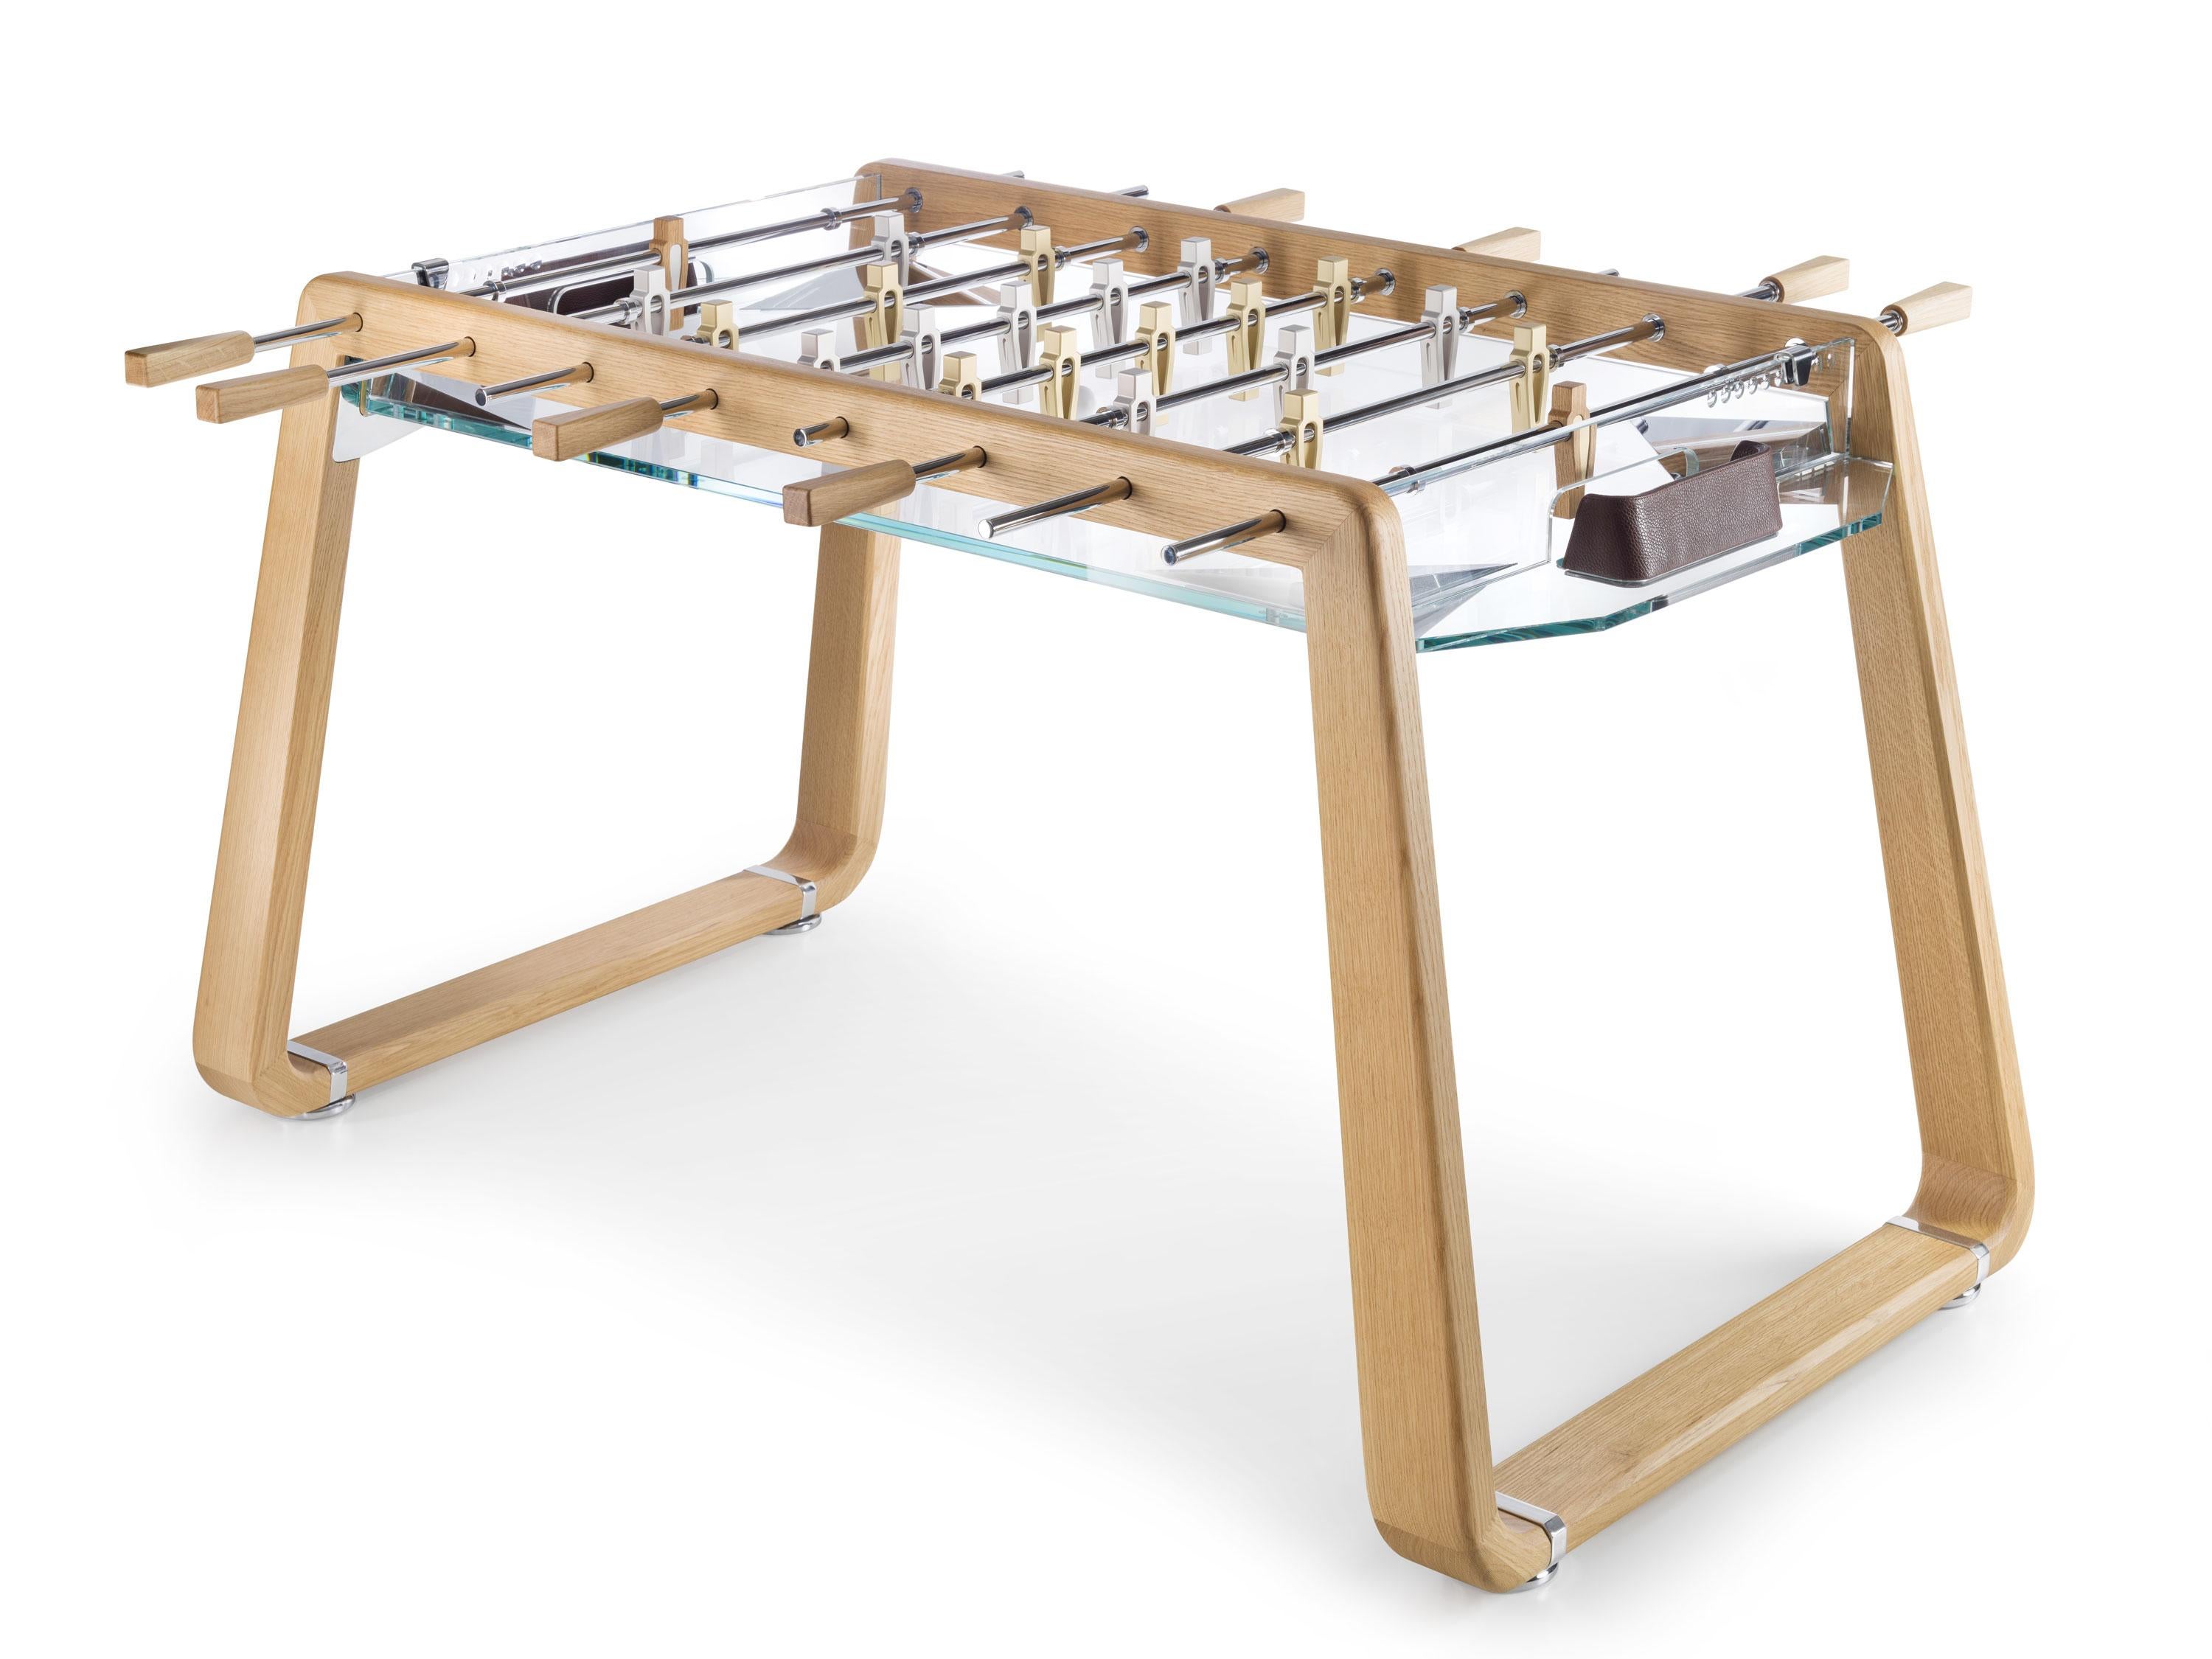 Derby di Milano Natural Oak Foosball by Impatia
Dimensions: D153.2 x W88.5 x H85.8 cm
Weight: 160 kg
Material: Wood structure,Glass playing field,Chrome finished metal components,Anodised aluminum players,Leather.
Also Available: Different